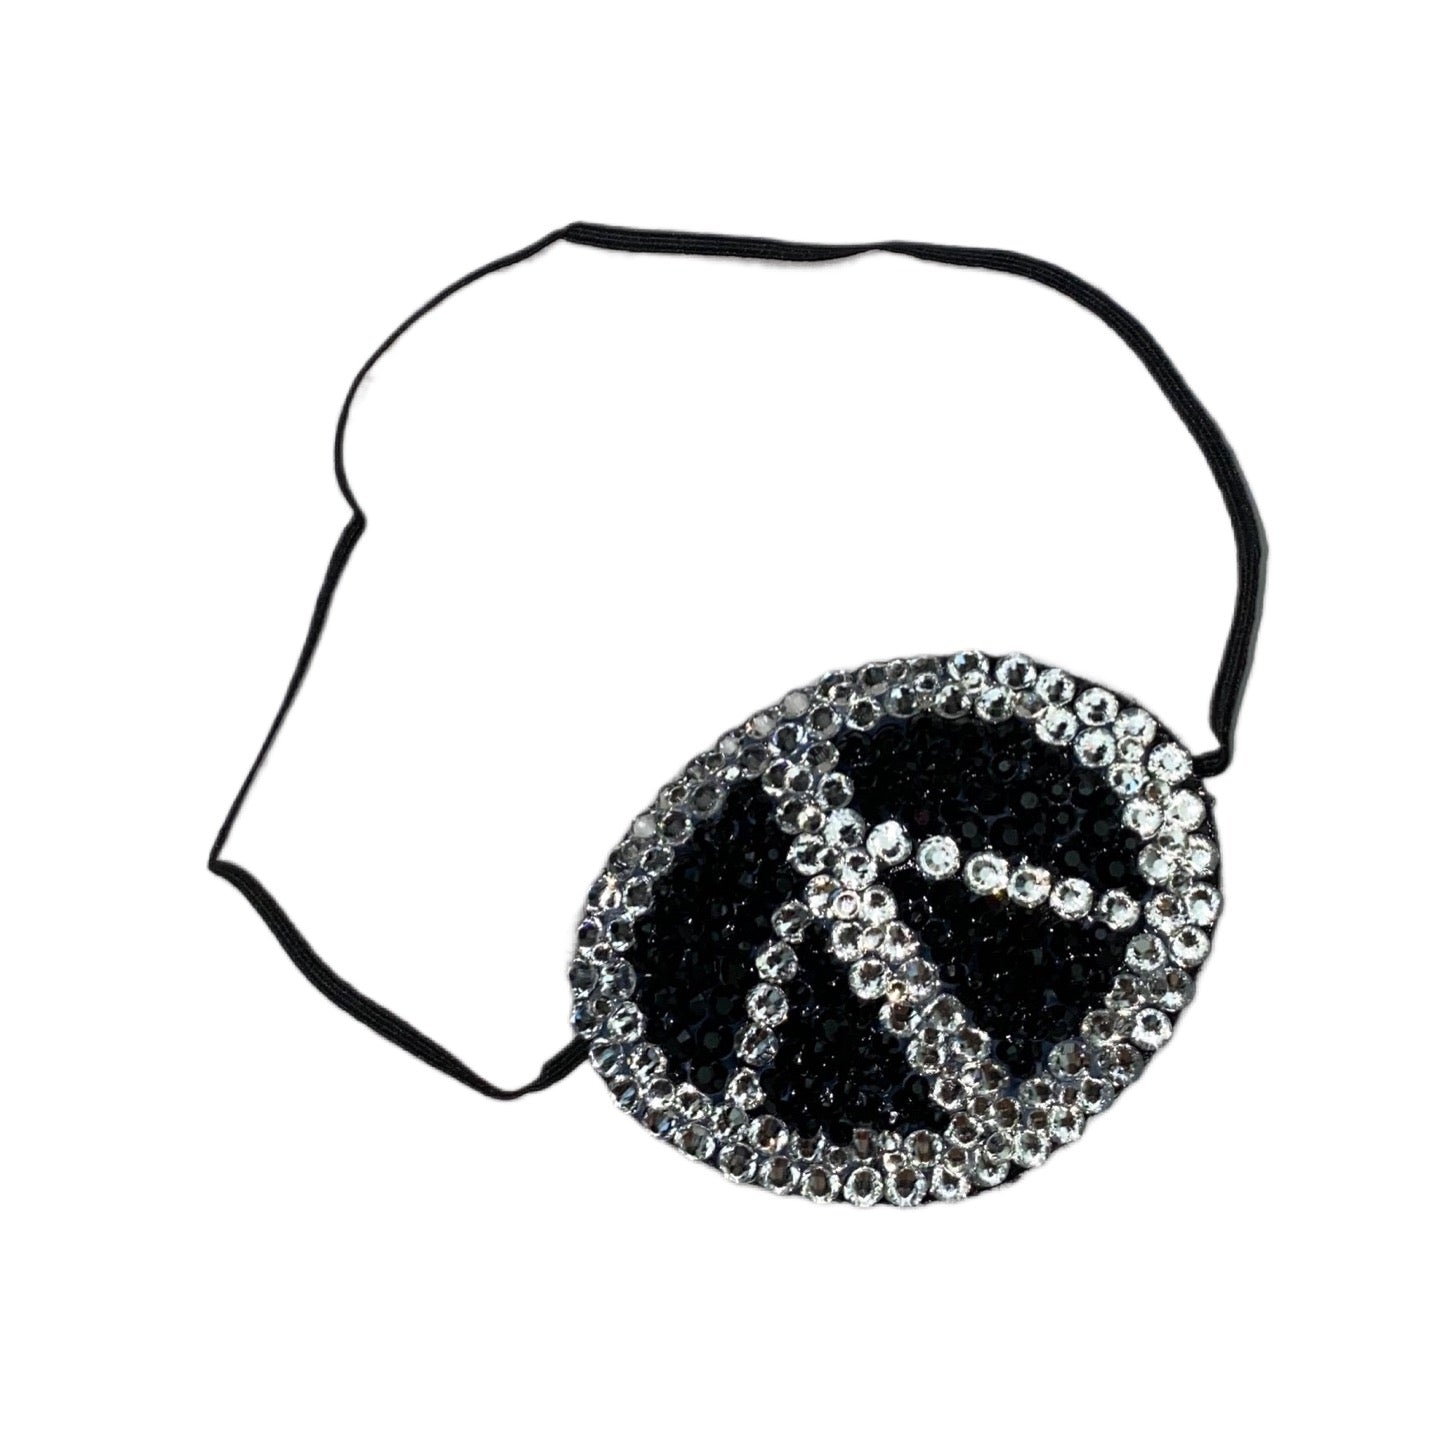 Black Eye Patch Bedazzled In Jet Black & Luxe Crystals "Peace"